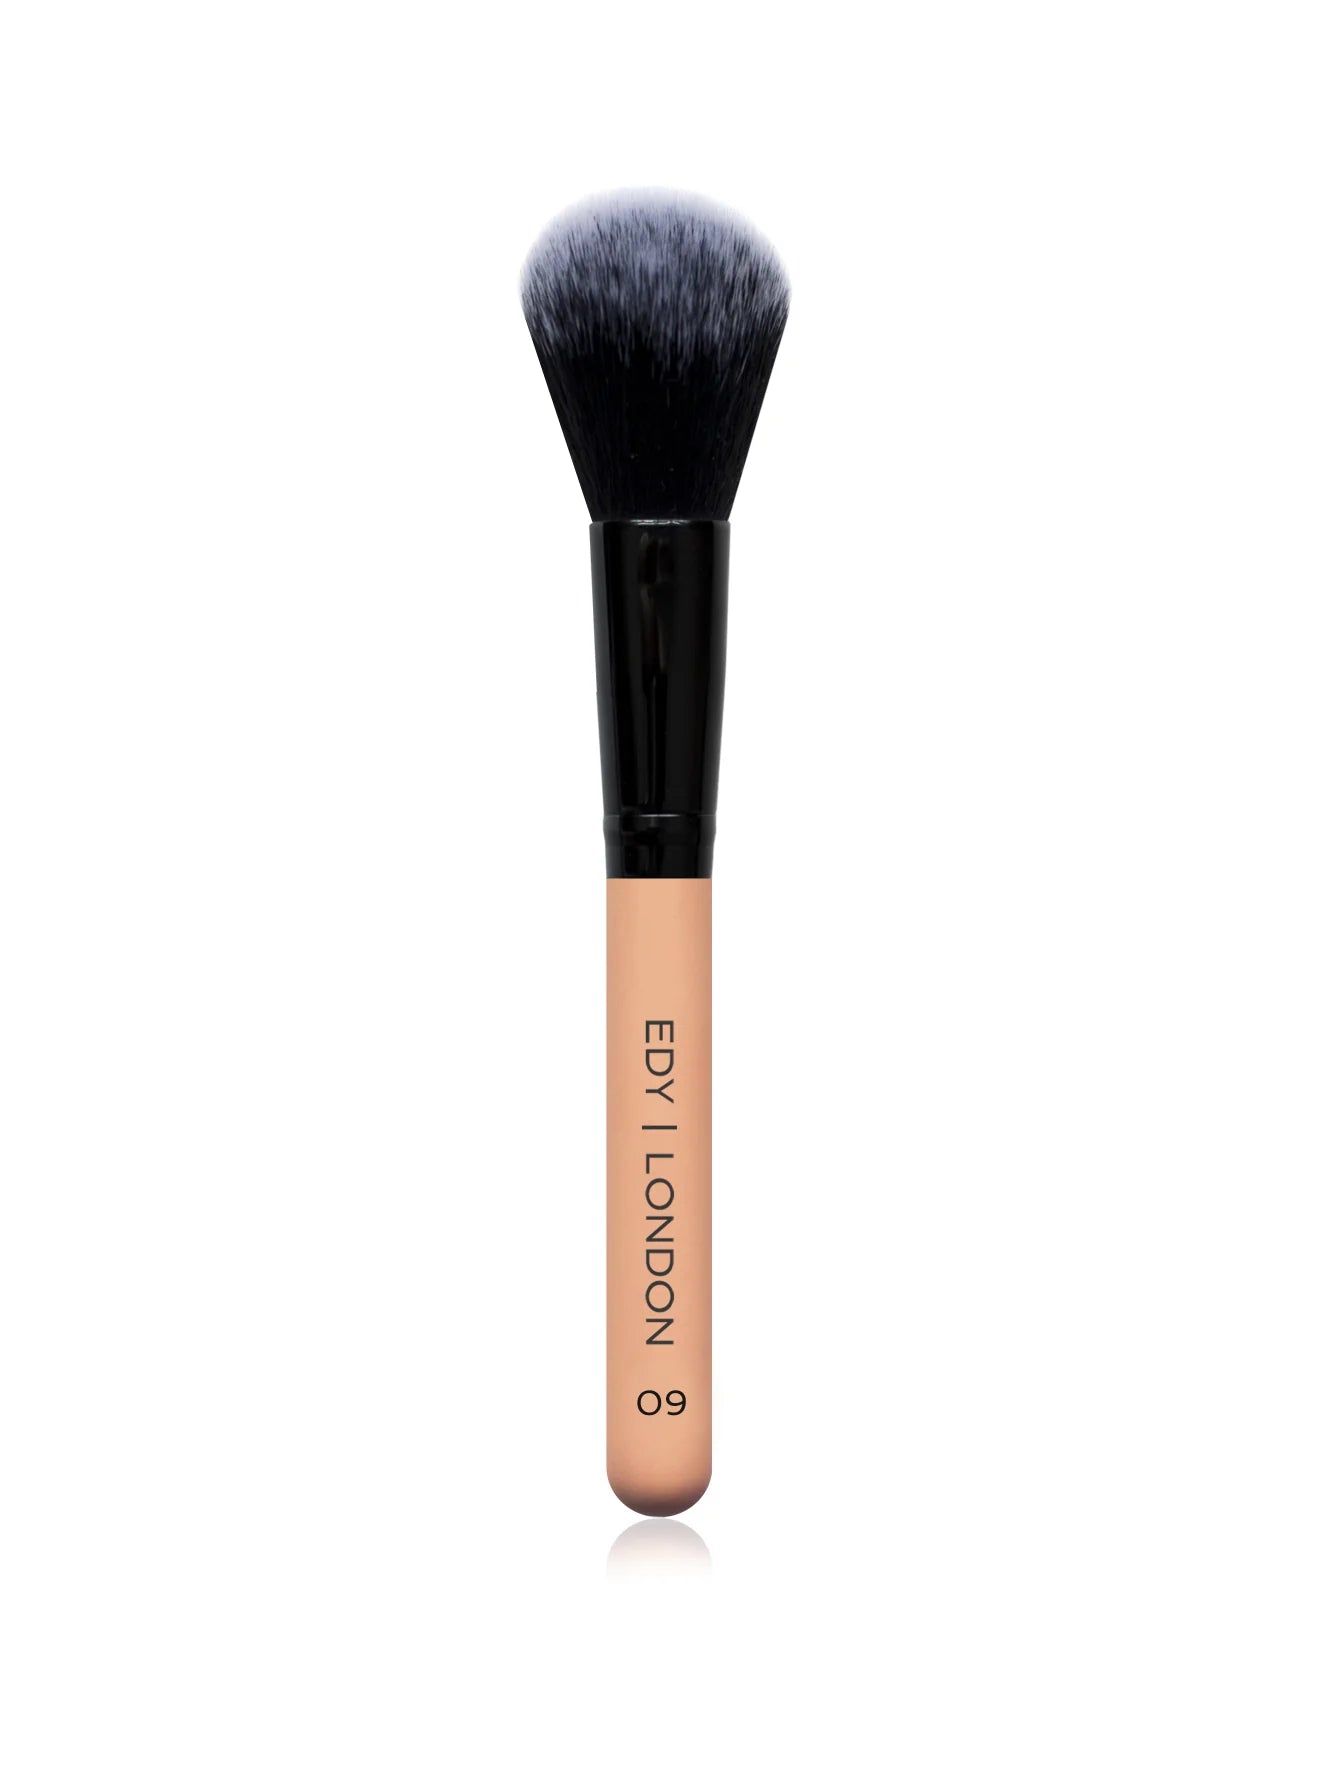 Small Domed Blush Brush 09 Make-up Brush EDY LONDON Pale Pink   - EDY LONDON PRODUCTS UK - The Best Makeup Brushes - shop.edy.london